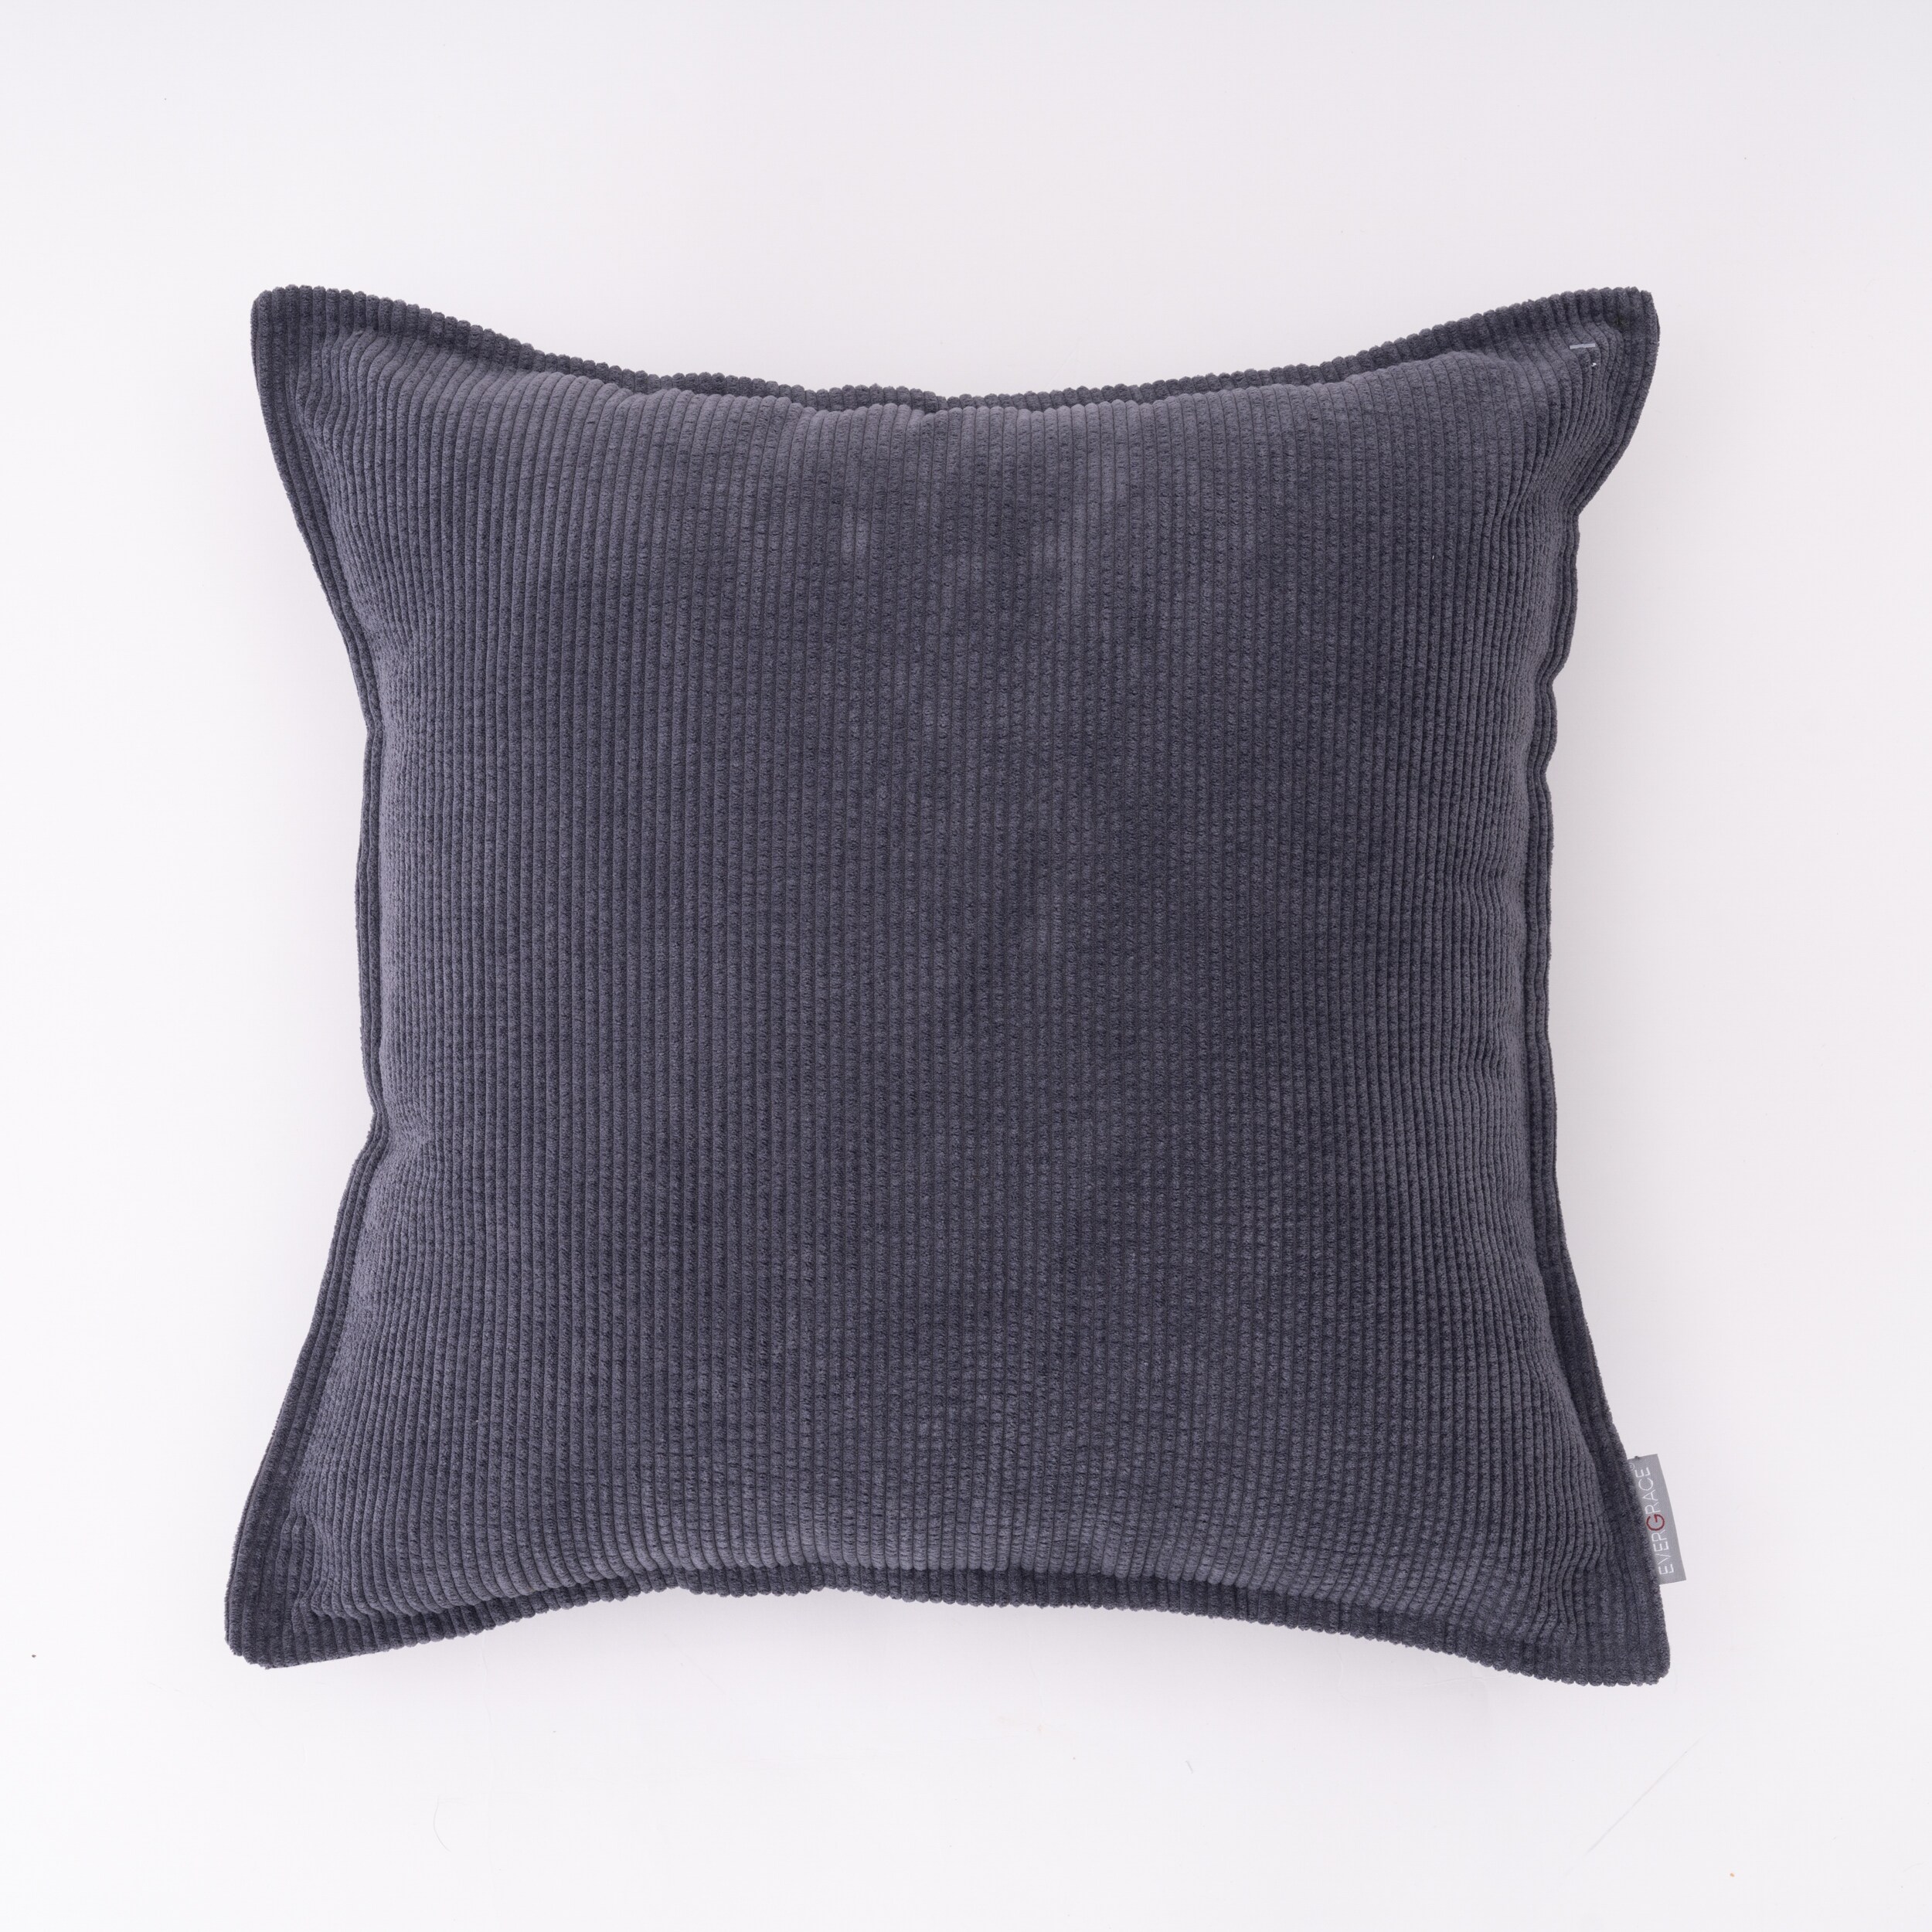 Bungee Ribbed Pillow - Square, Patterns